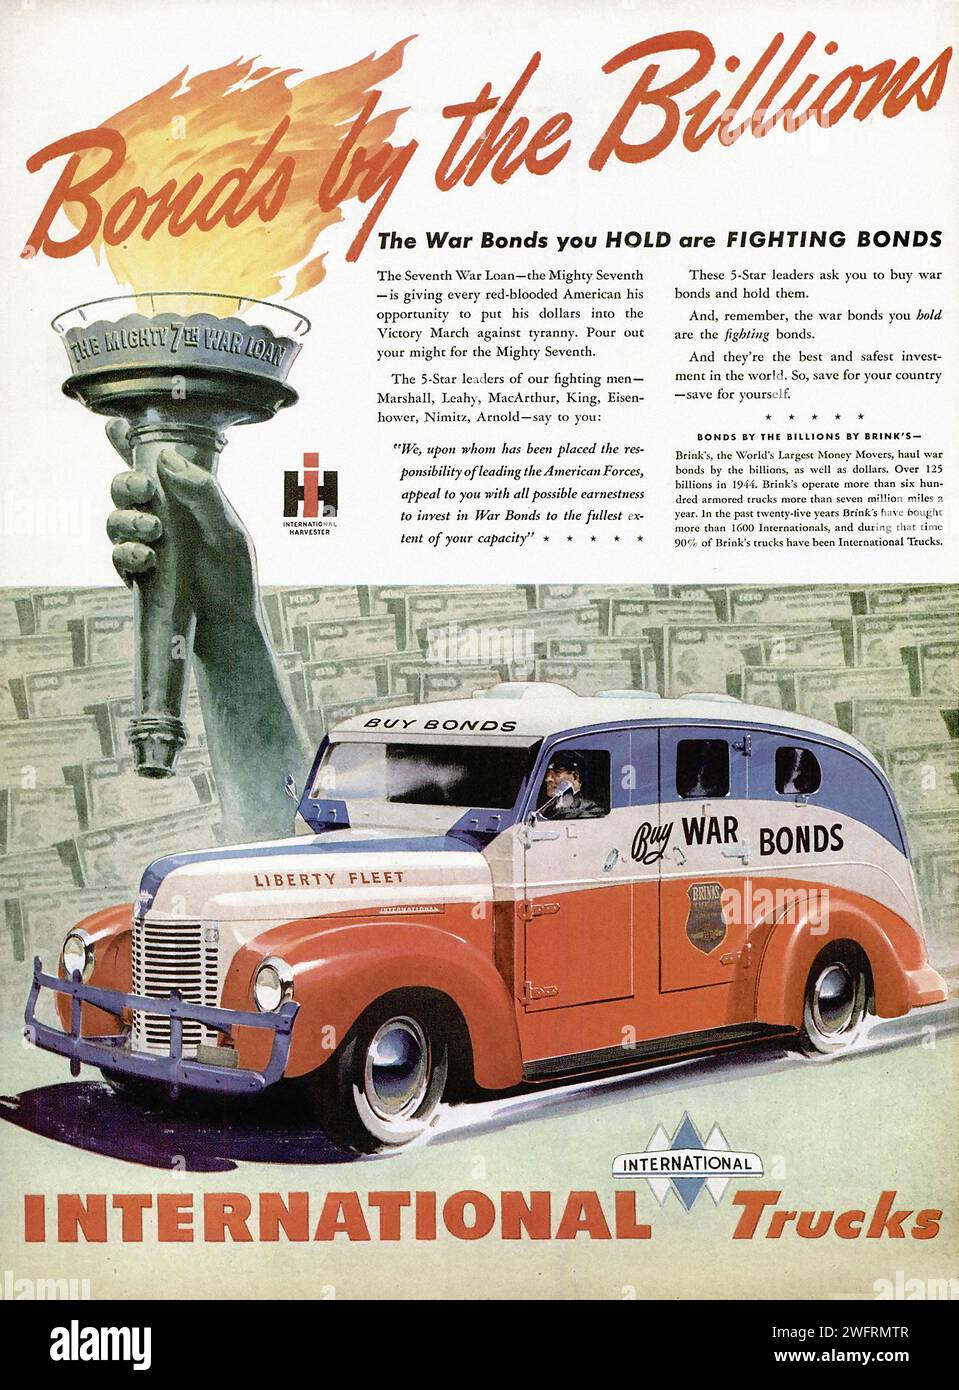 Bounds by the Billions The War Bonds you HOLD are FIGHTING BONDS The War Bonds you BUY are VICTORY BONDS INTERNATIONAL TRUCKS  A vintage advertisement for International Trucks featuring a red truck with “Buy War Bonds” written on the side. The truck is parked in front of a white building with a statue of a hand holding a torch. The background is a blue sky with clouds. - American (U.S.) advertising, World War II era Stock Photo